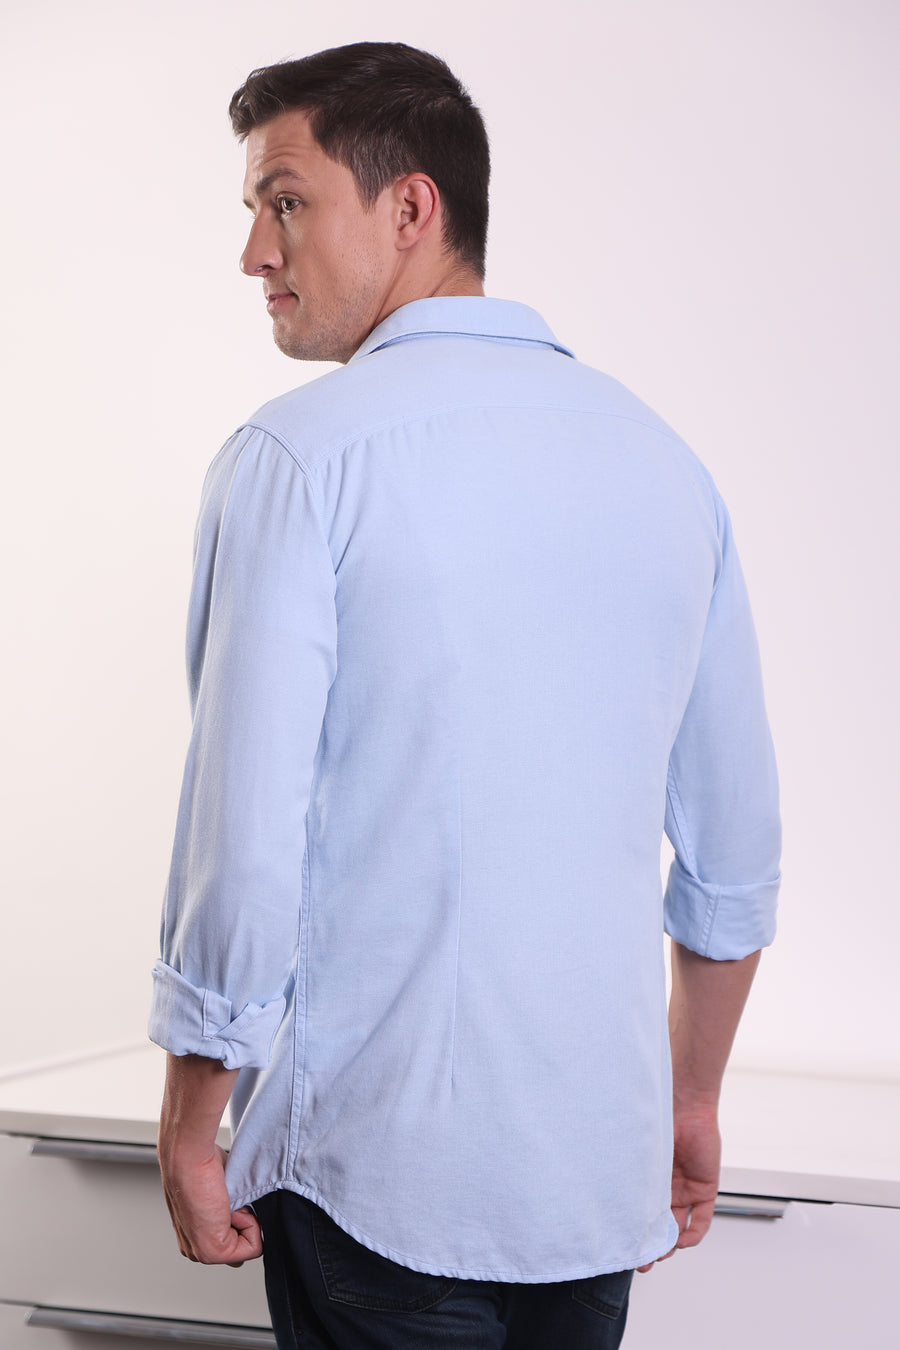 Trewen - Double Pocket Shirt With Snap Button - Sky